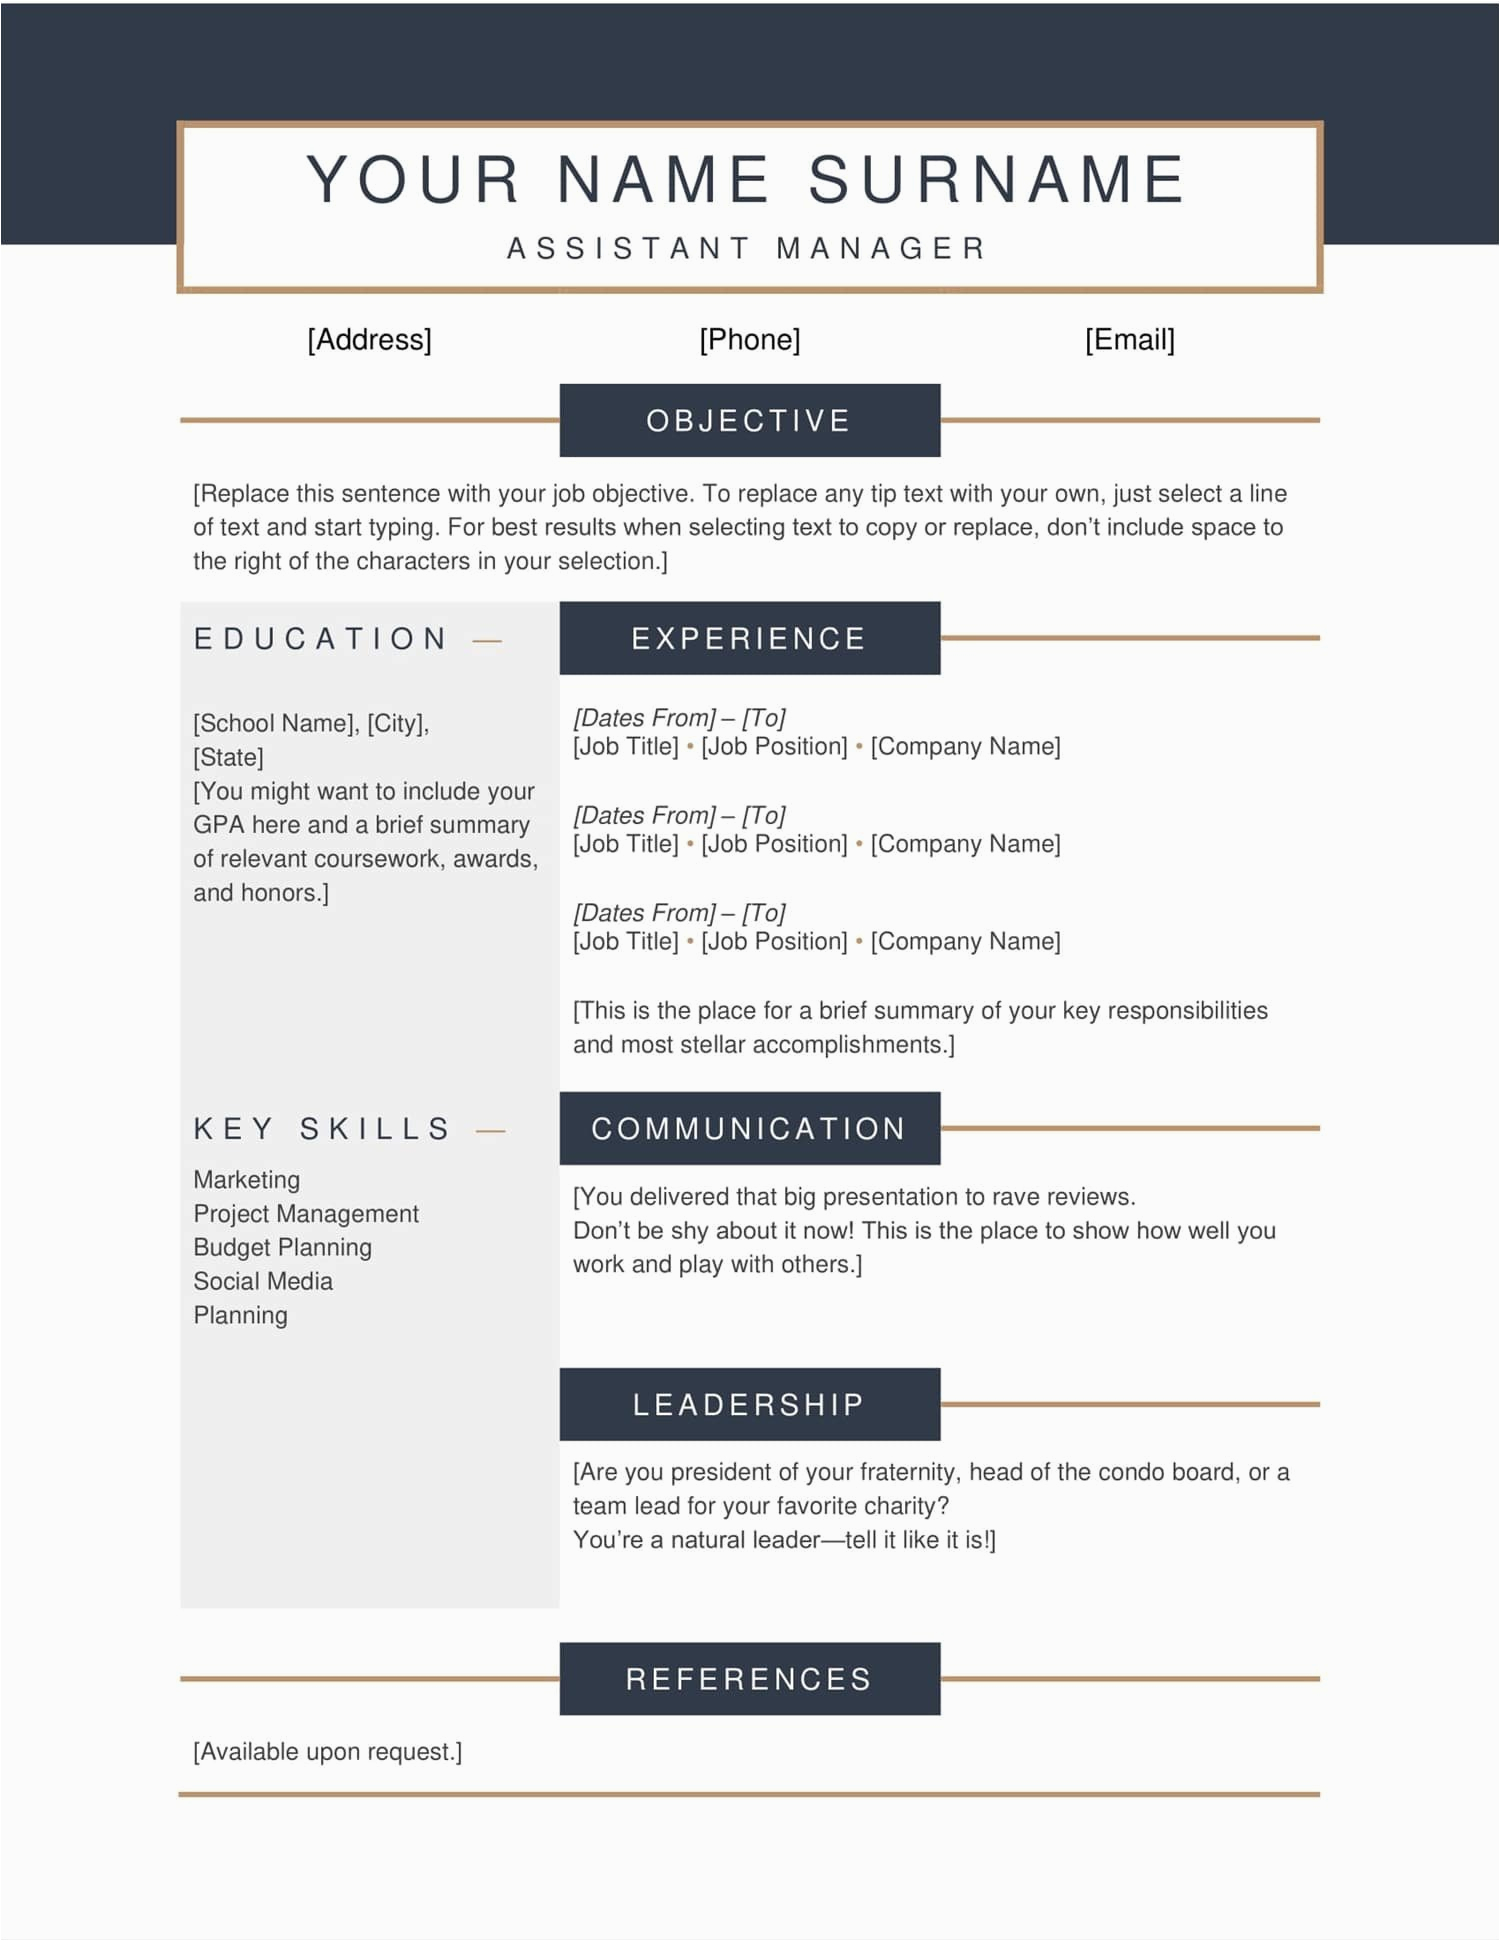 Free Resume Templates that Can Be Downloaded Resume Templates that I Can Copy and Paste